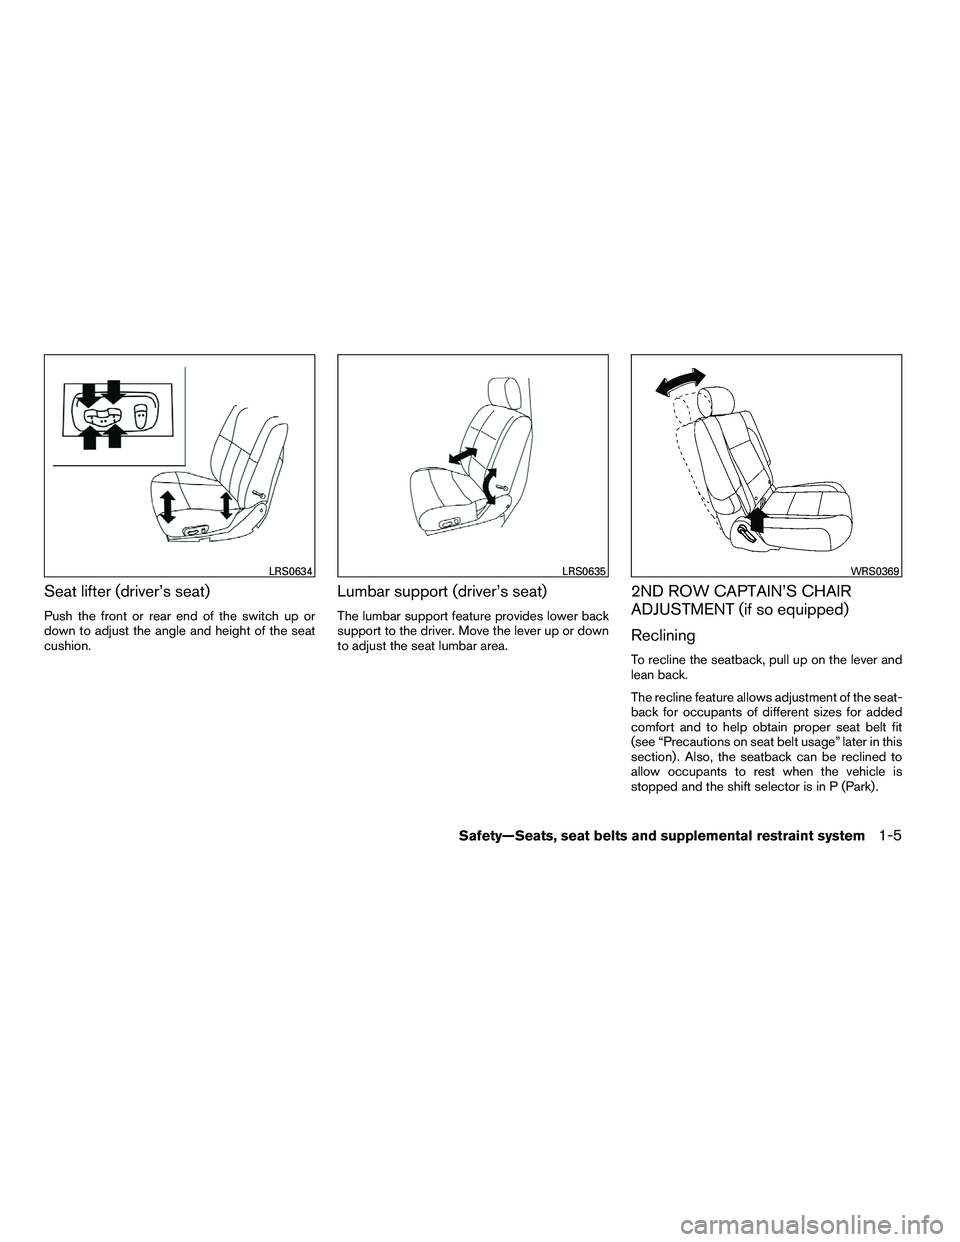 NISSAN ARMADA 2010  Owners Manual Seat lifter (driver’s seat)
Push the front or rear end of the switch up or
down to adjust the angle and height of the seat
cushion.
Lumbar support (driver’s seat)
The lumbar support feature provid